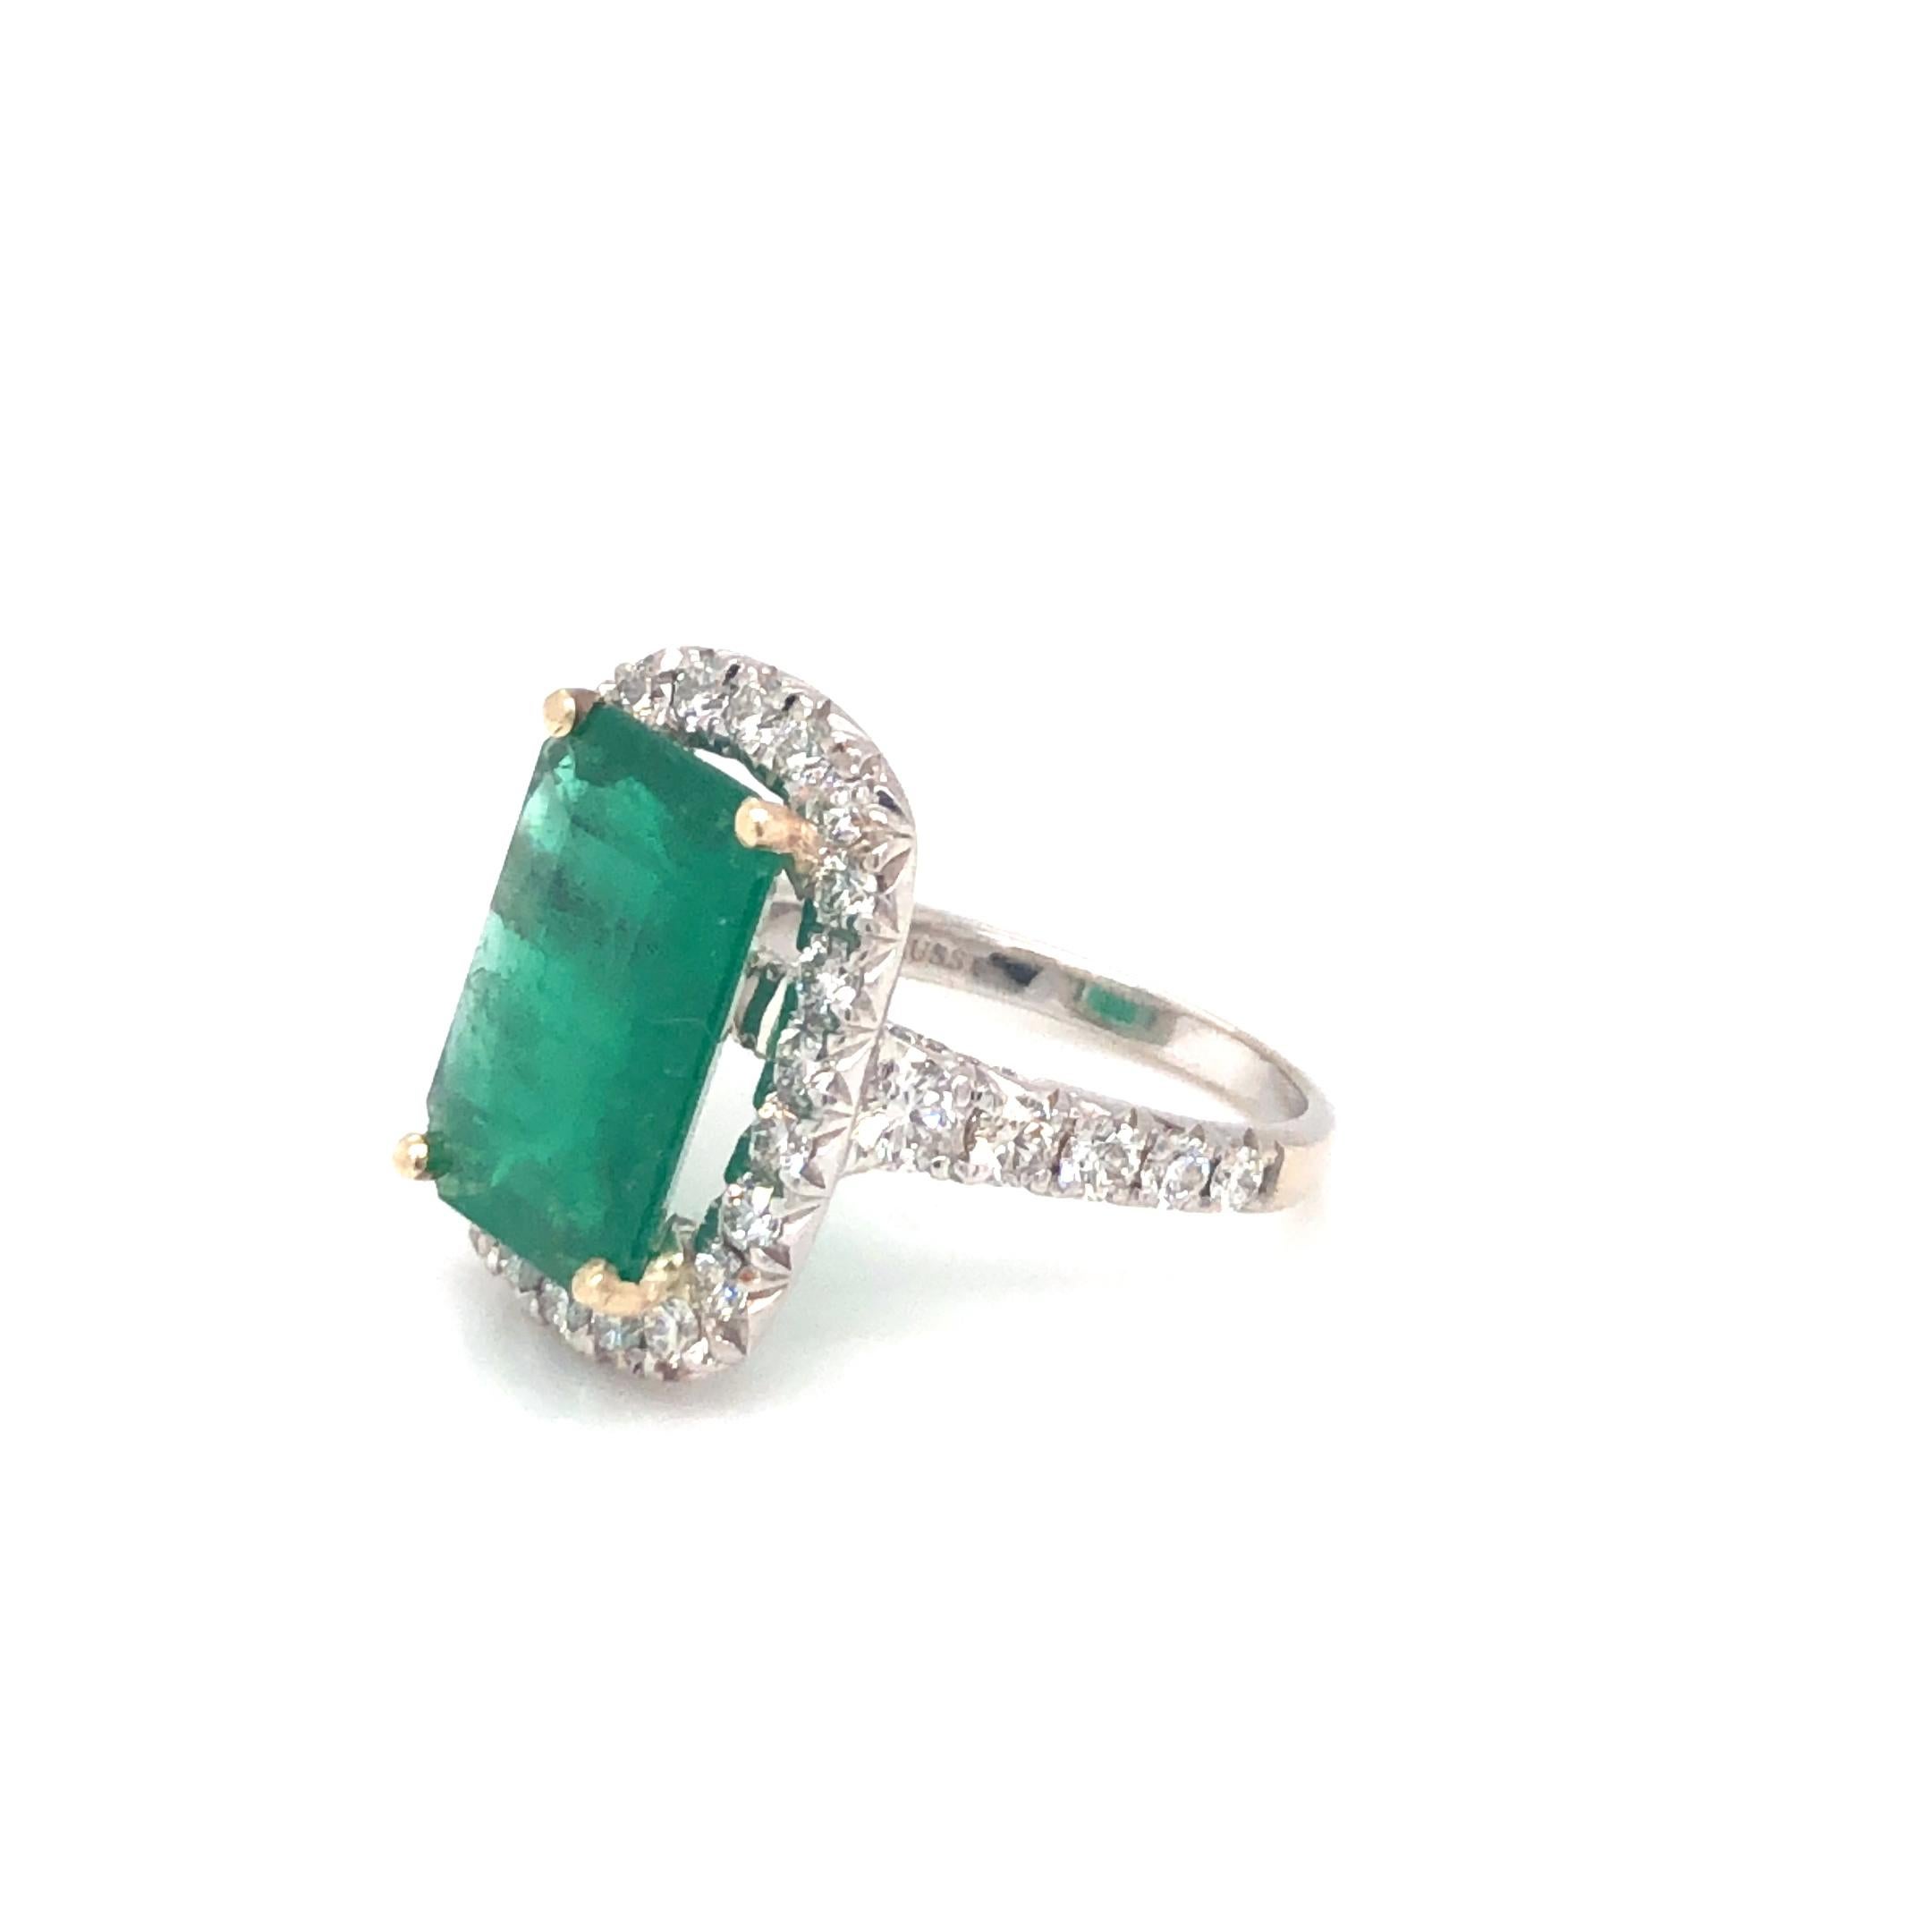 Emerald 5.32ct and Diamond Ring 18k White Gold In Good Condition For Sale In Dallas, TX